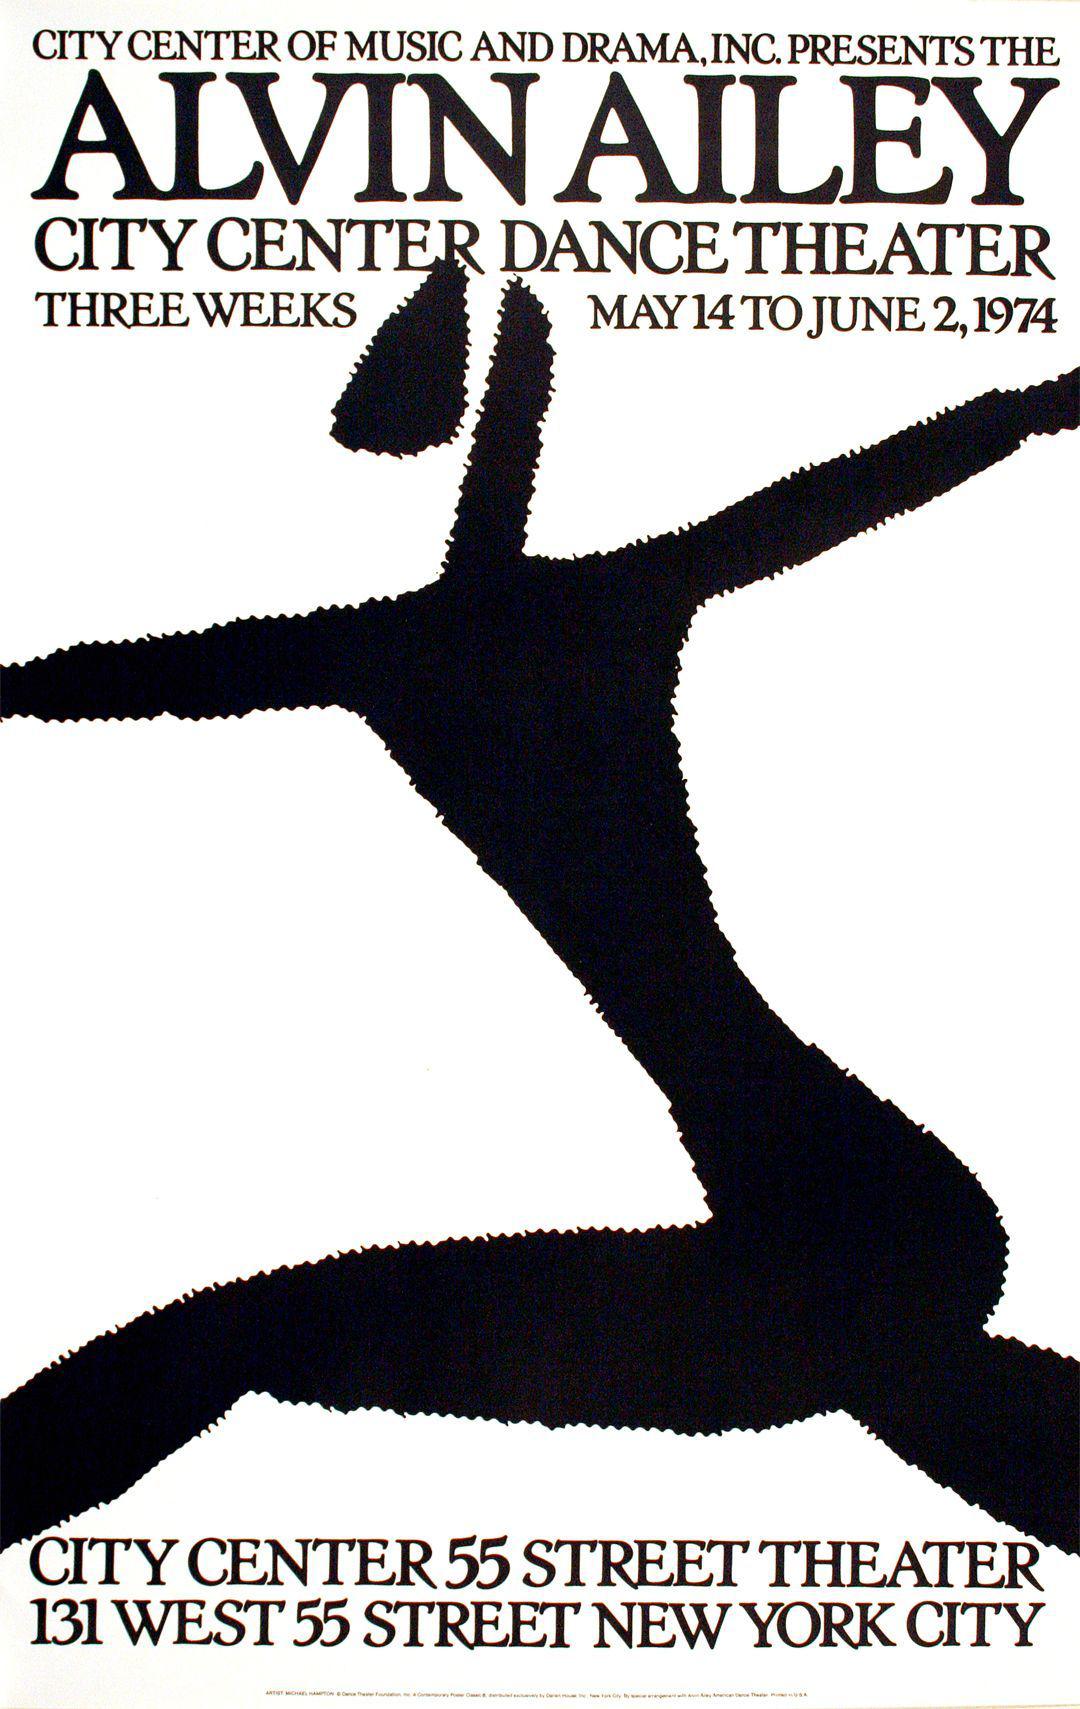 Alvin Ailey Dance Theater Ballet Poster 1974 by Hampton